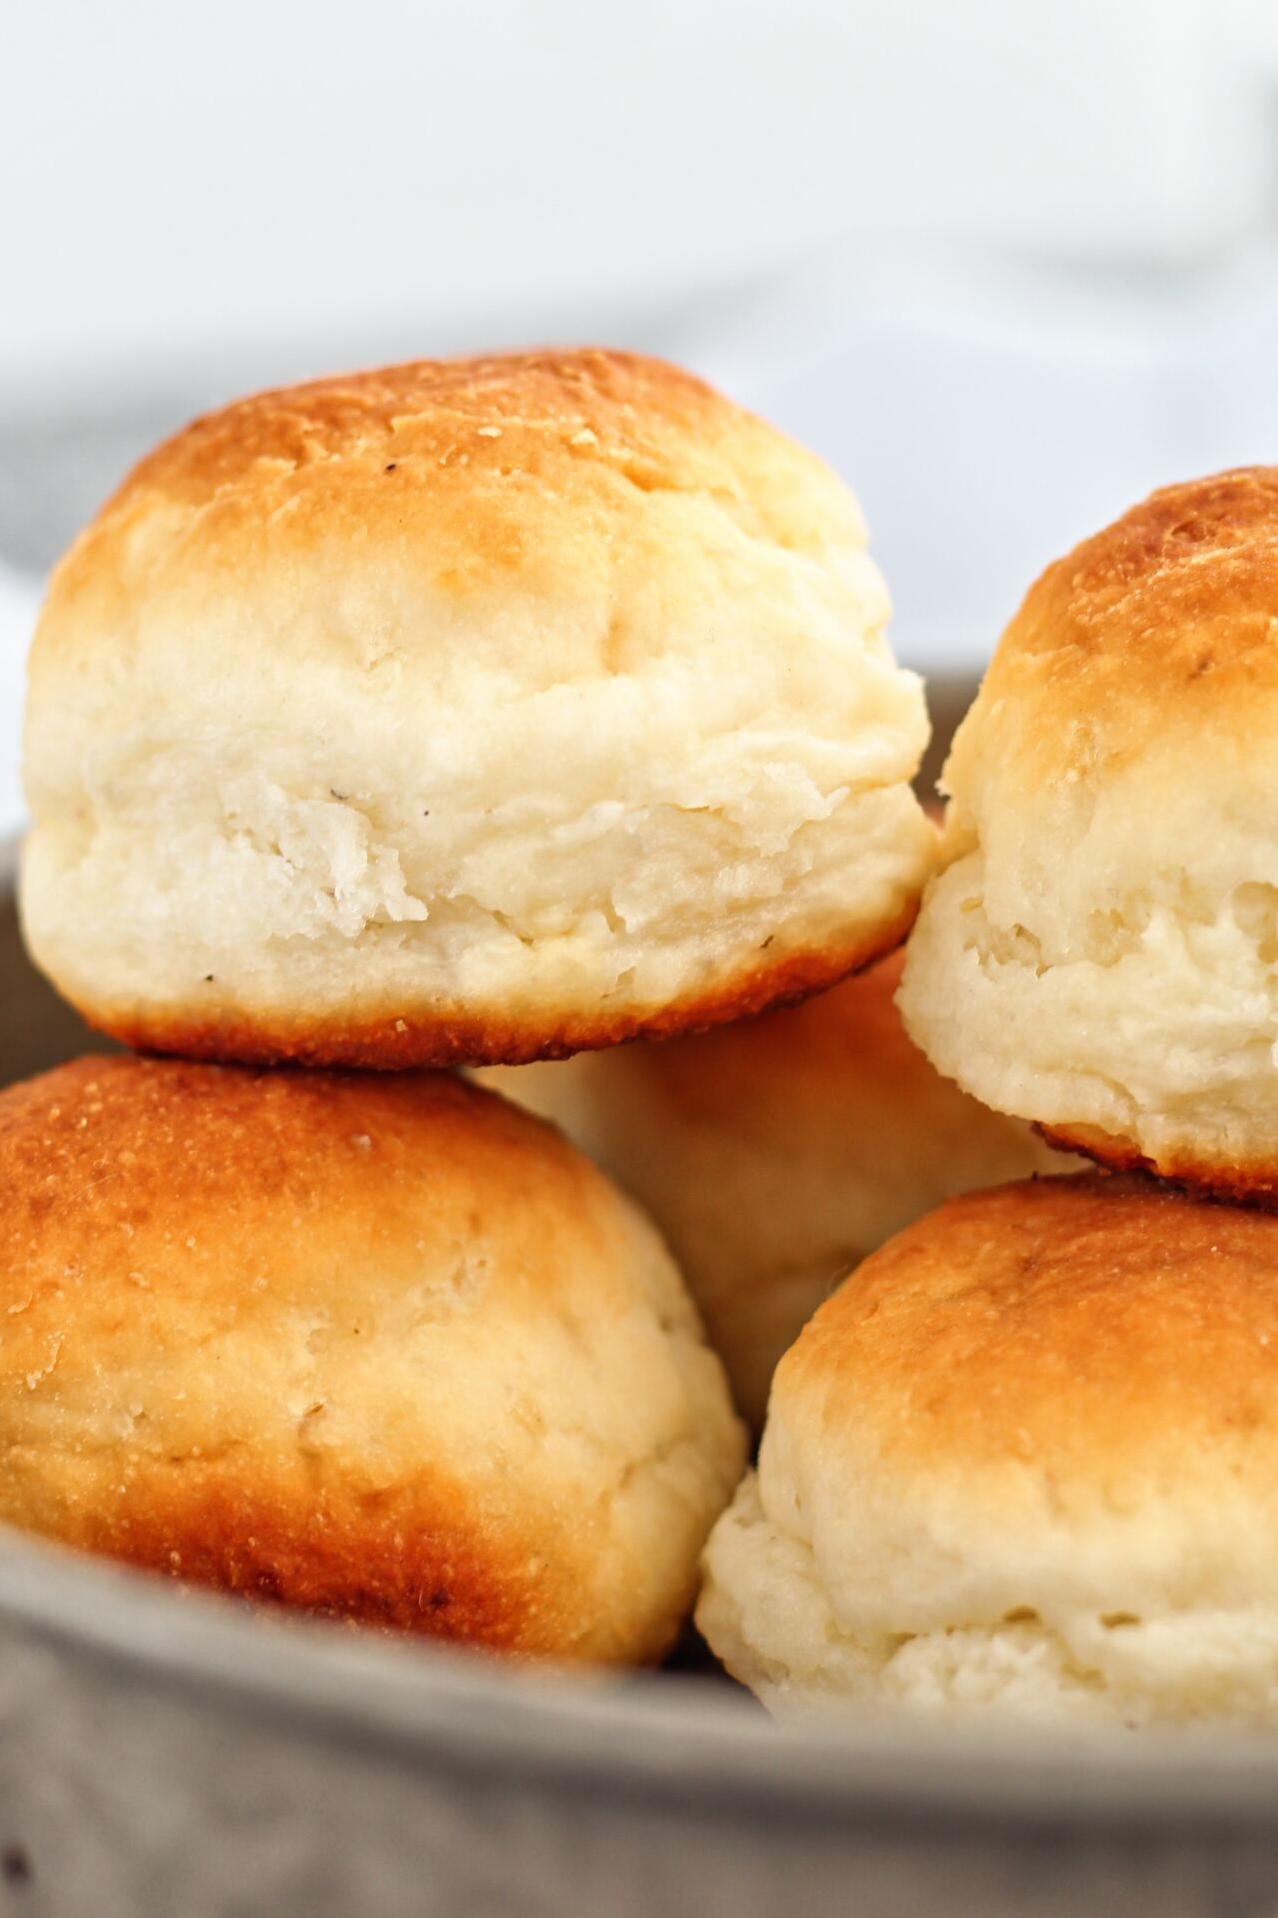  These gluten-free batter buns are soft, fluffy, and delicious!